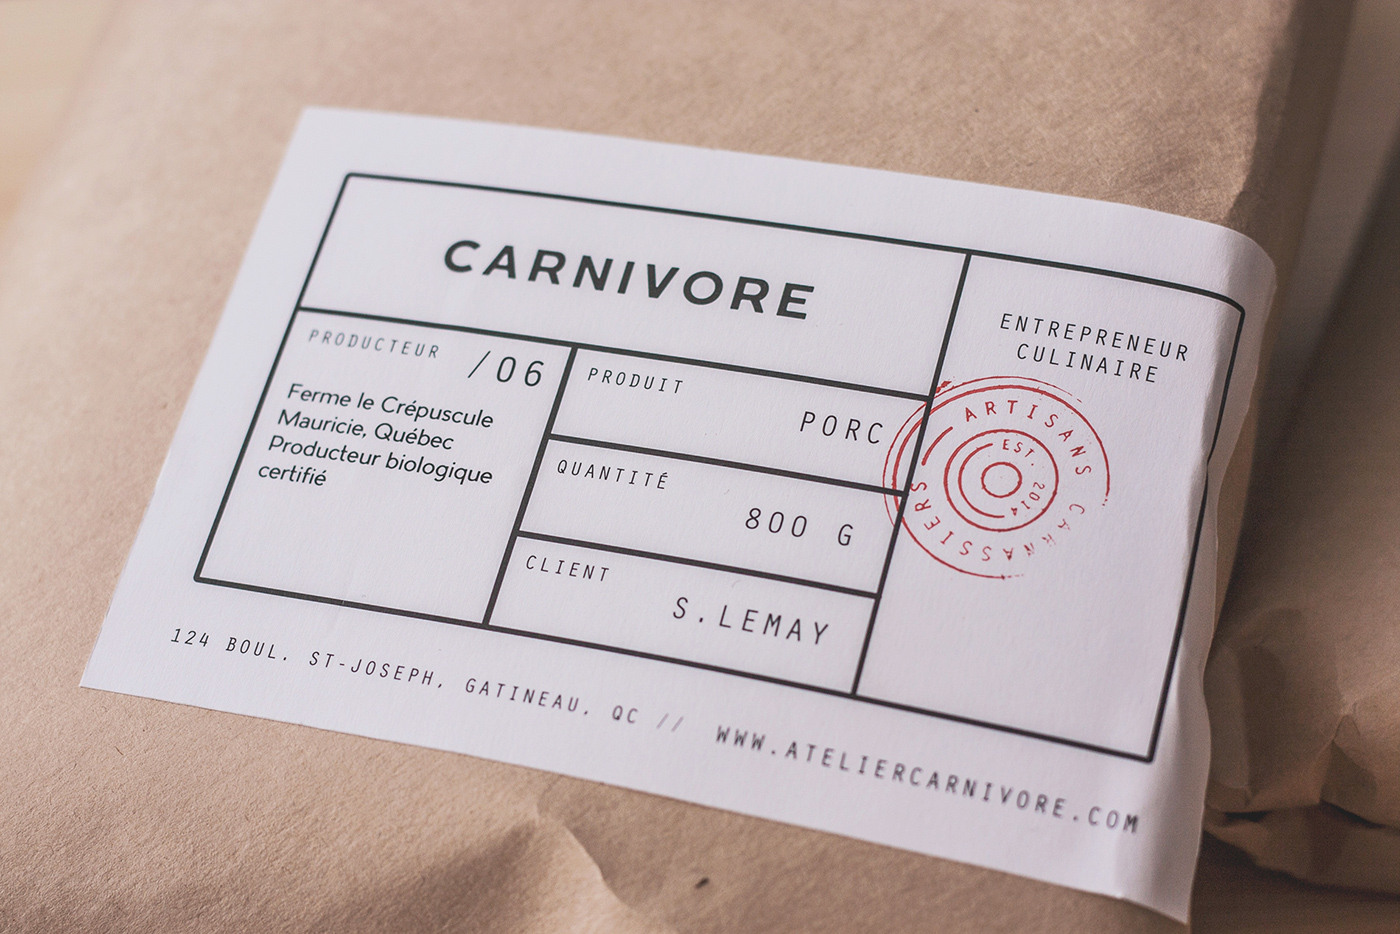 Atelier Carnivore carnivore timeless logo Authentic Logo Design business card Brand Design brand identity identity brand grill BBQ local products restaurant